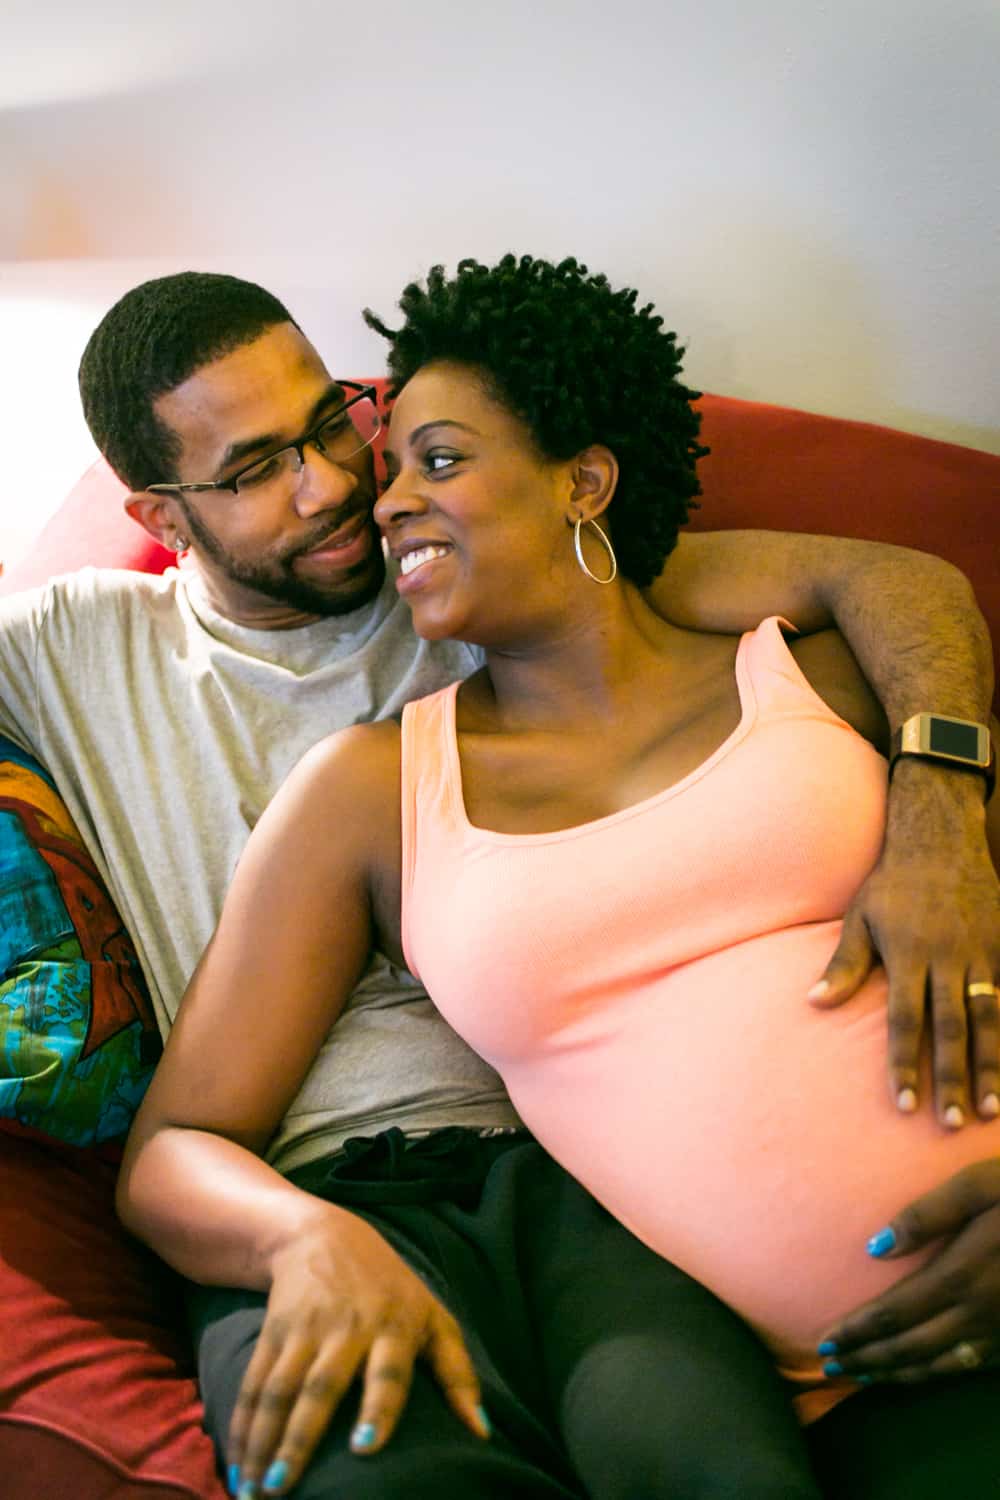 Parents-to-be sitting on couch by Queens maternity photographer